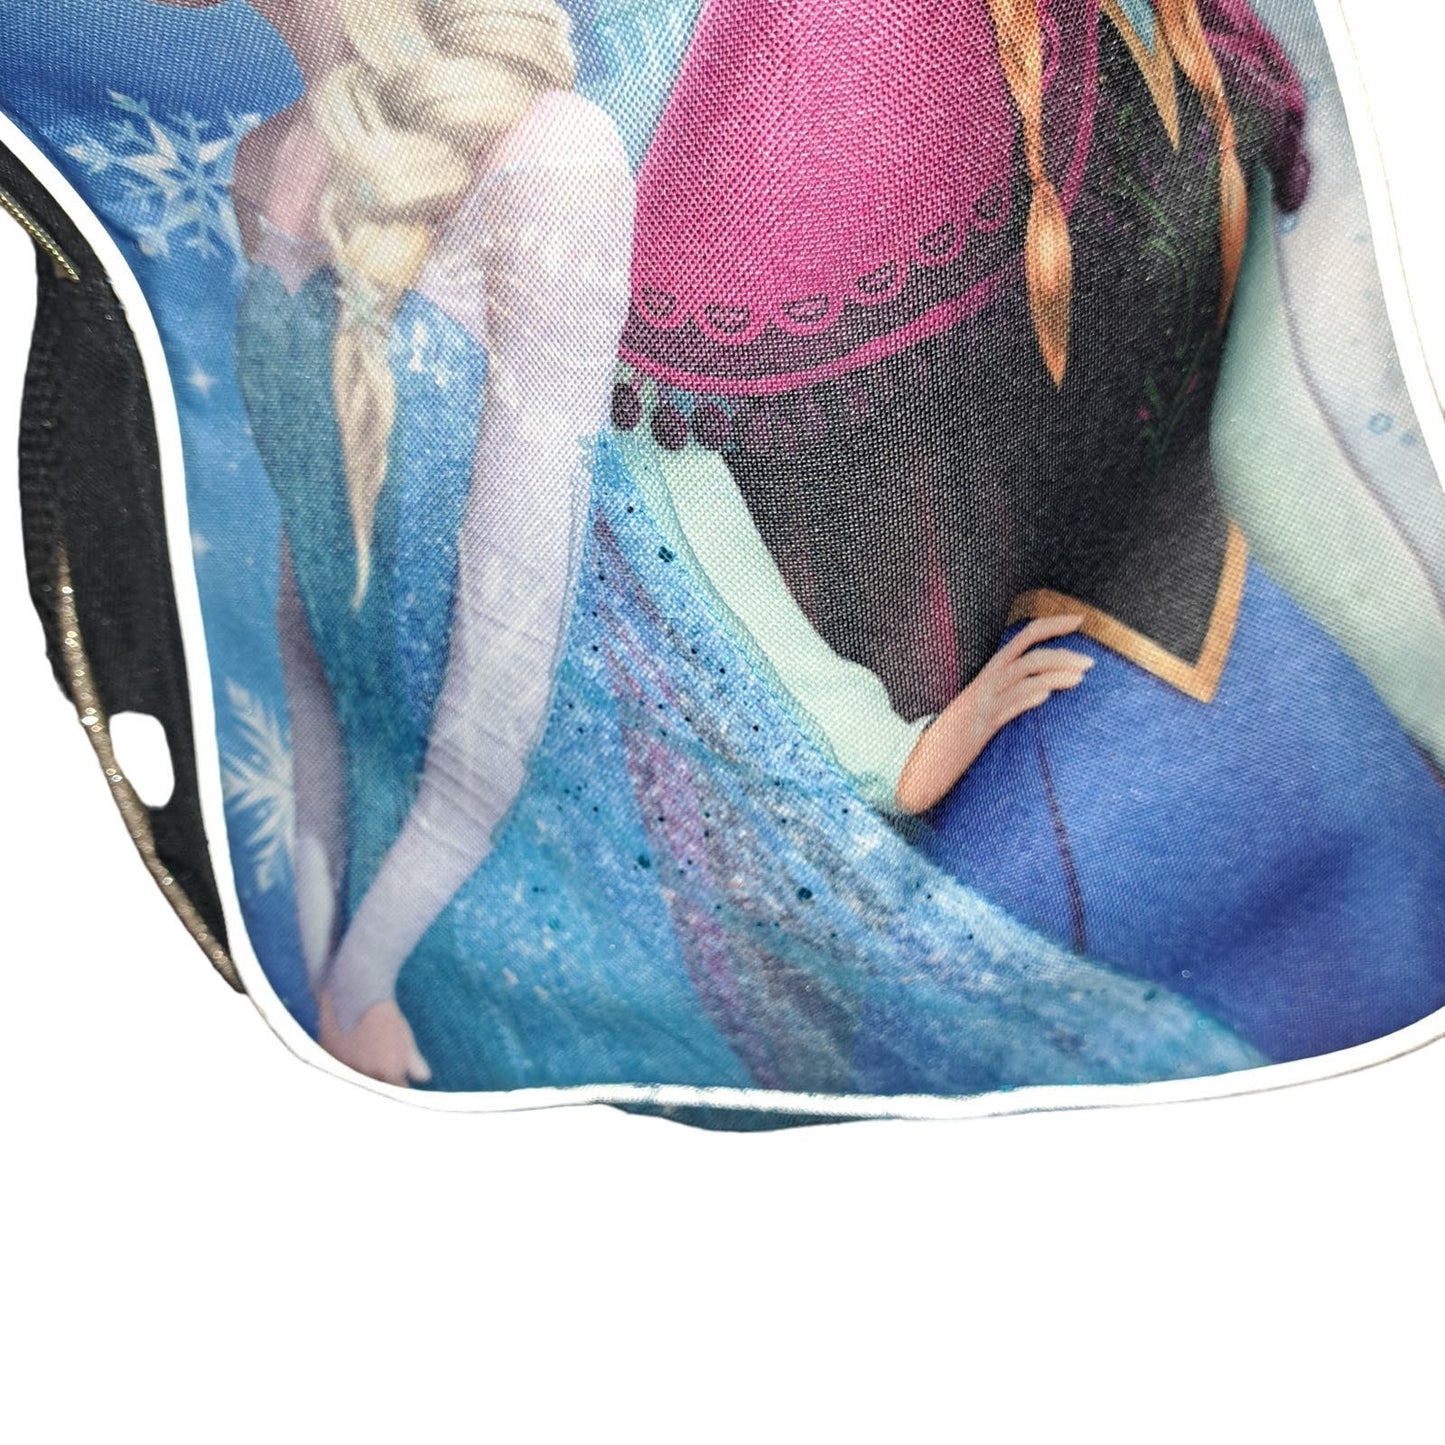 SALE!! New Anna and Elsa FROZEN Battery-operated Lights Backpack